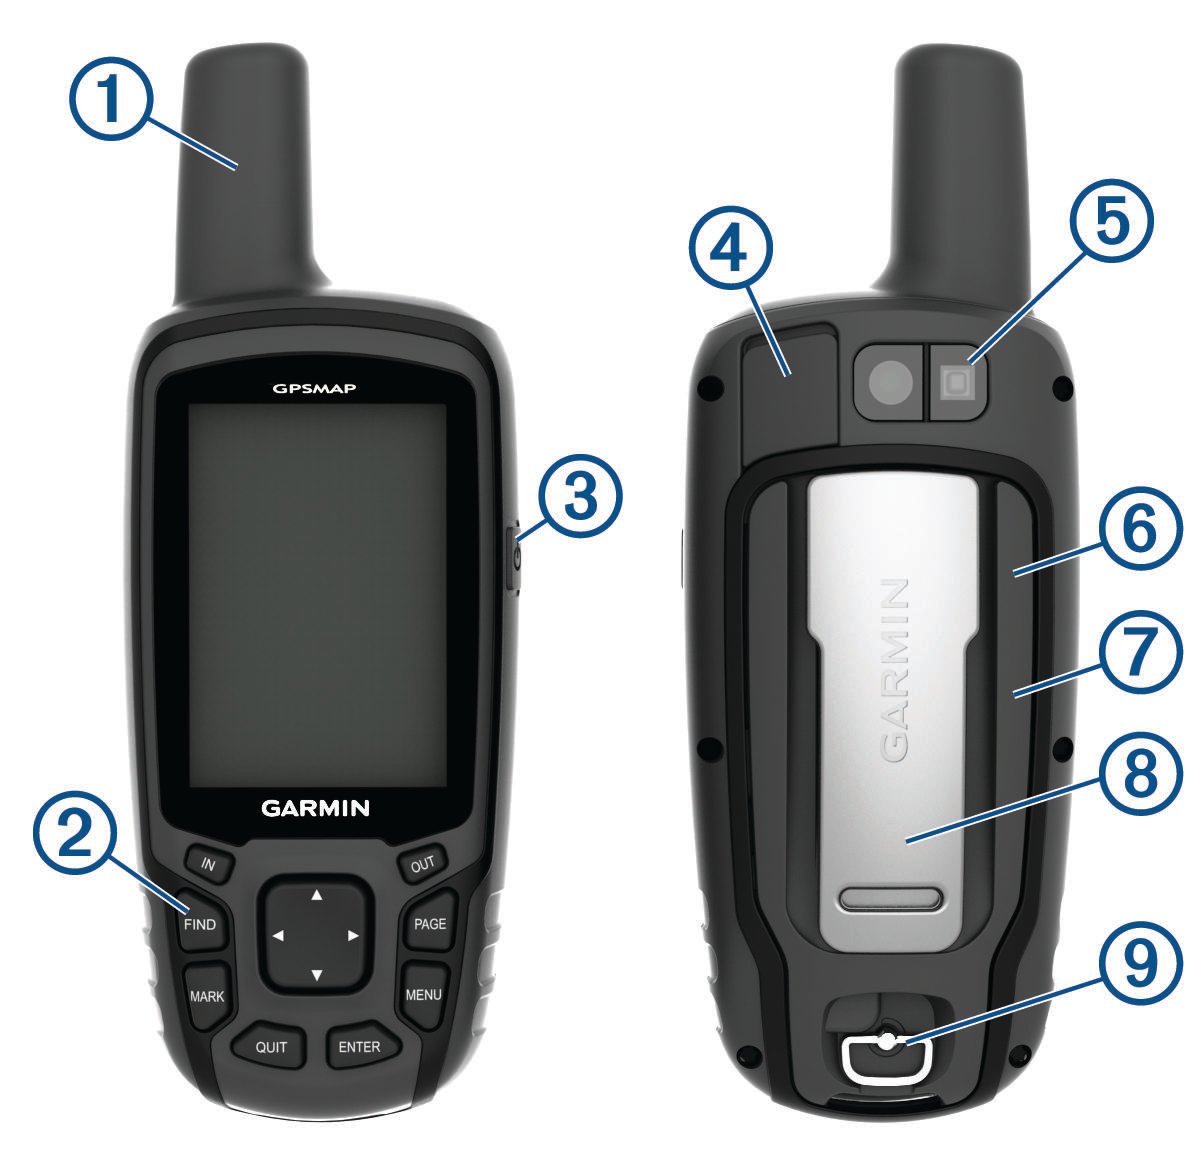 Front and back views of the device with callouts